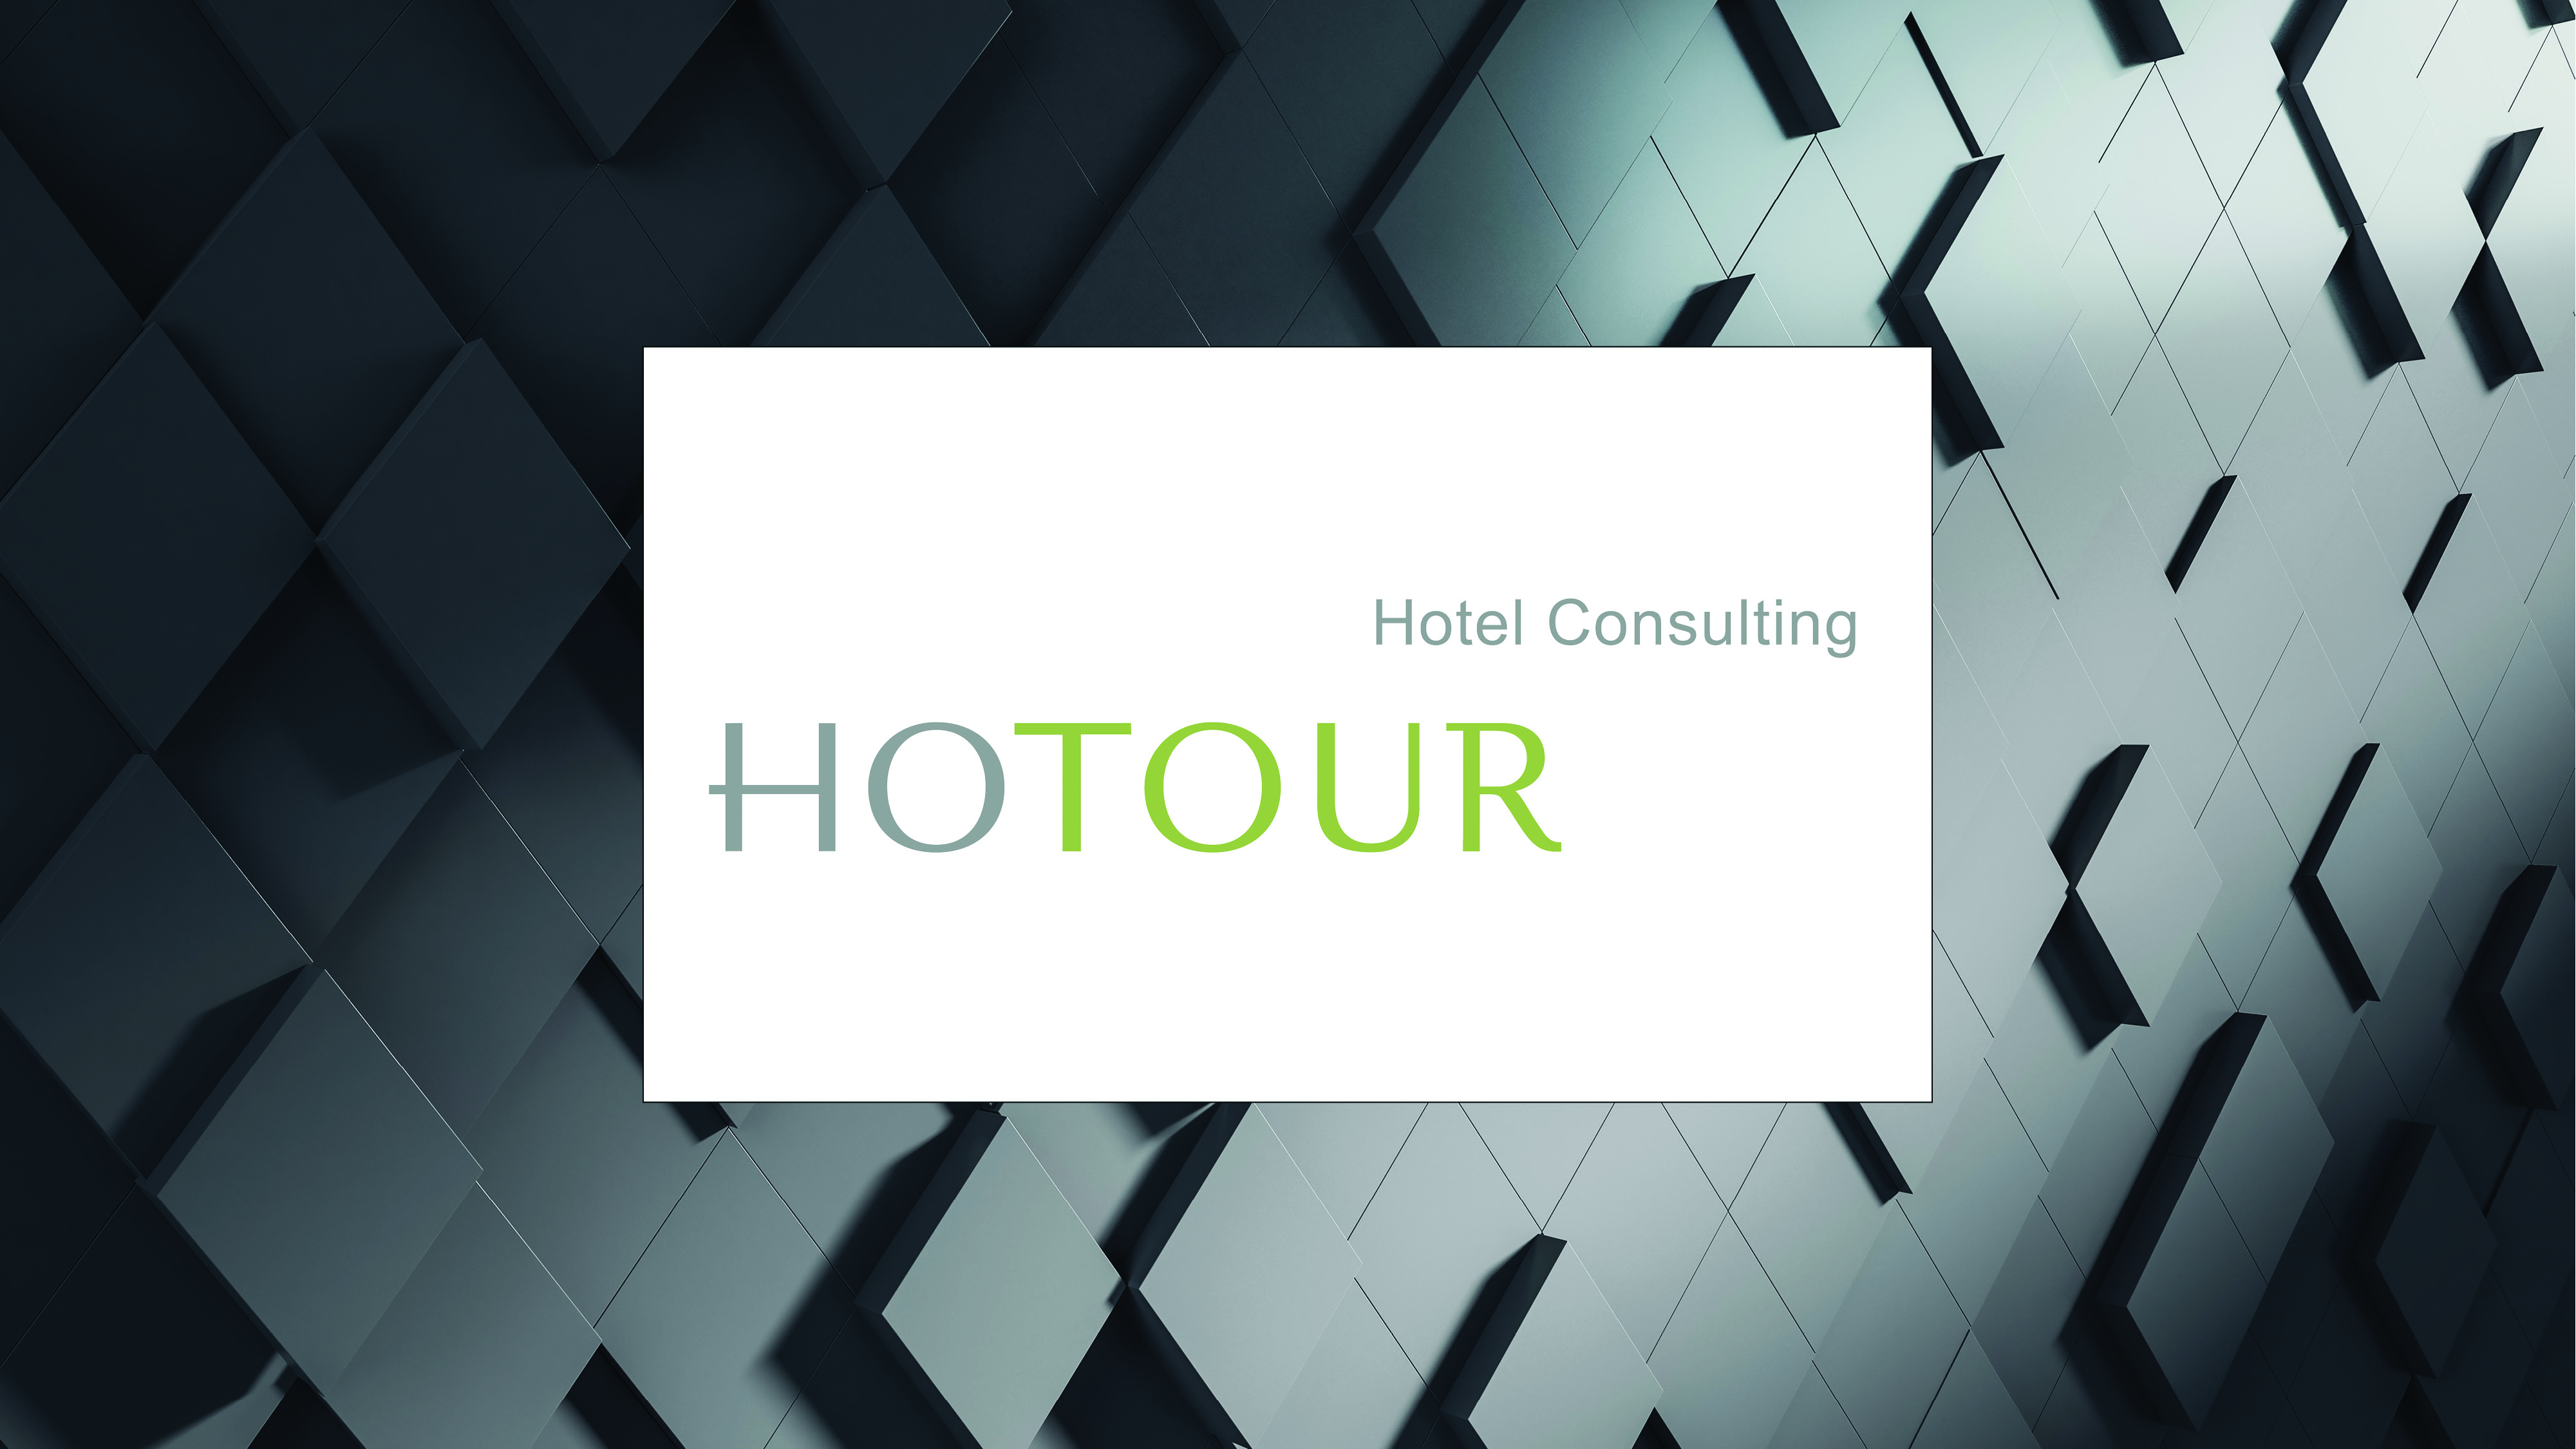 Hotour Hotel Consulting